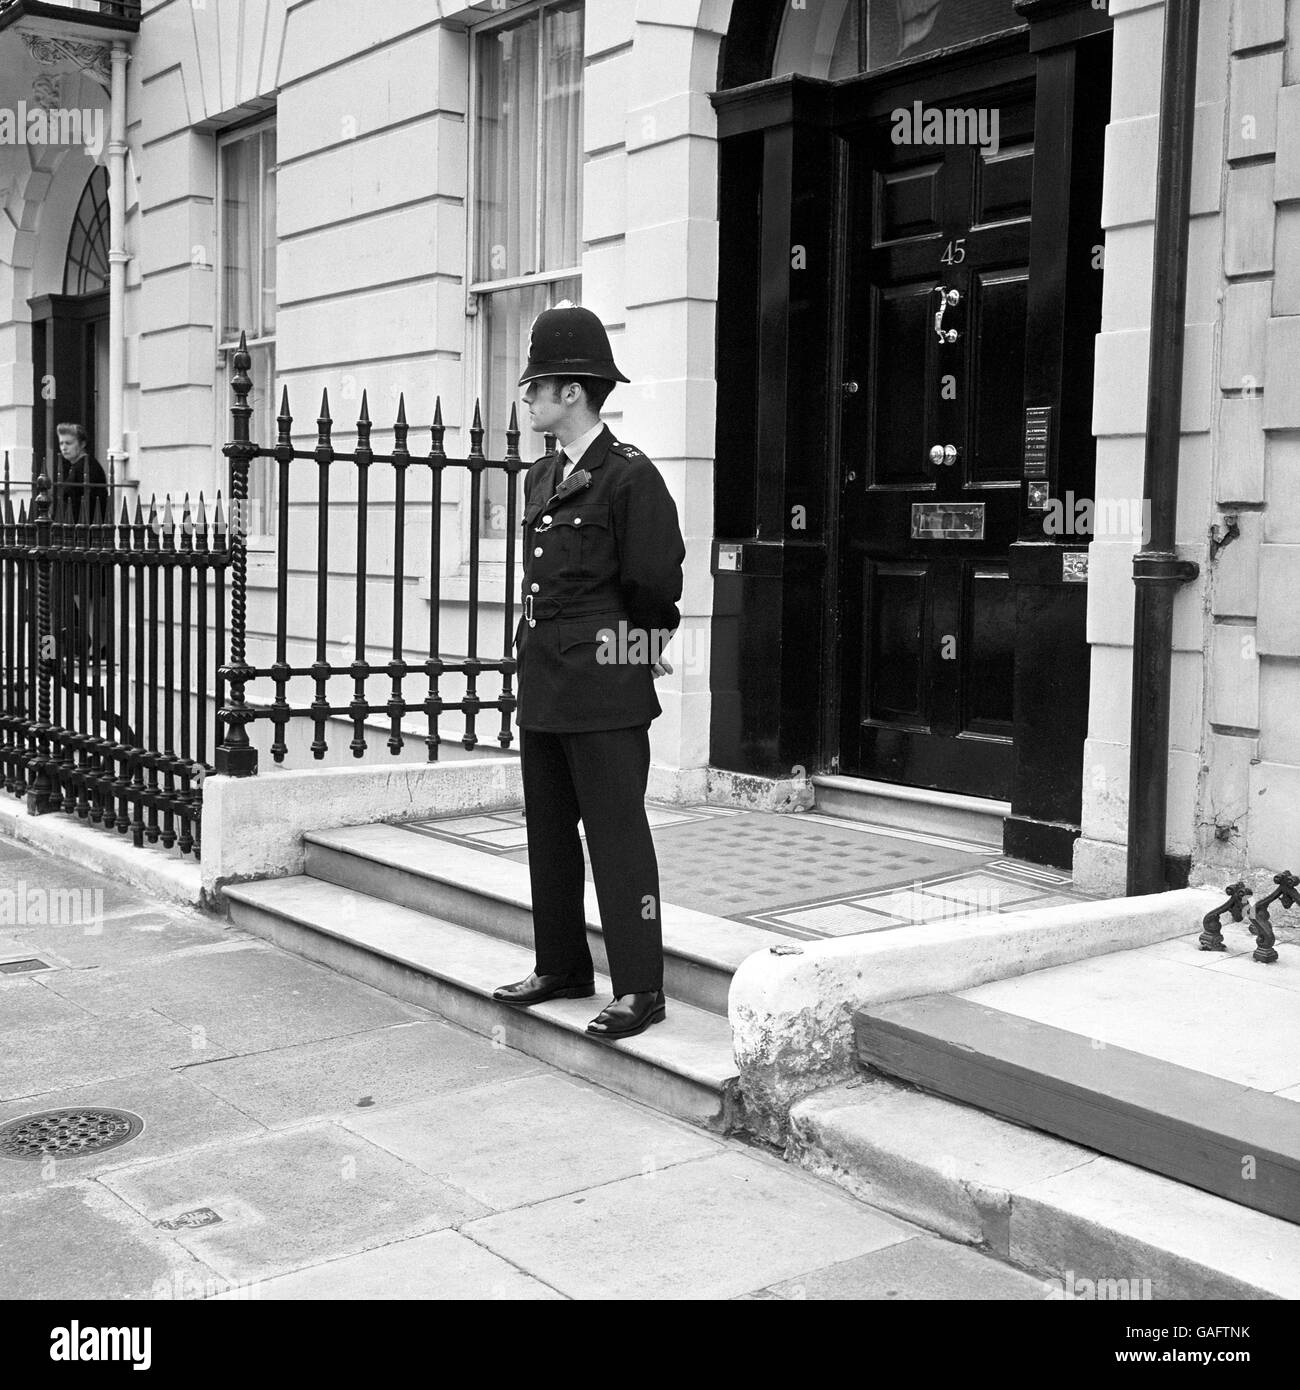 A policeman is seen on duty outside the block of flats in Wimpole Street, London today, where the radio 'ham' lives who tipped off police that he had overheard a gang talking about a raid. Later the police searched a number of banks within a 10 mile radius, including the branch of Lloyd's where a huge haul was carried out. Stock Photo